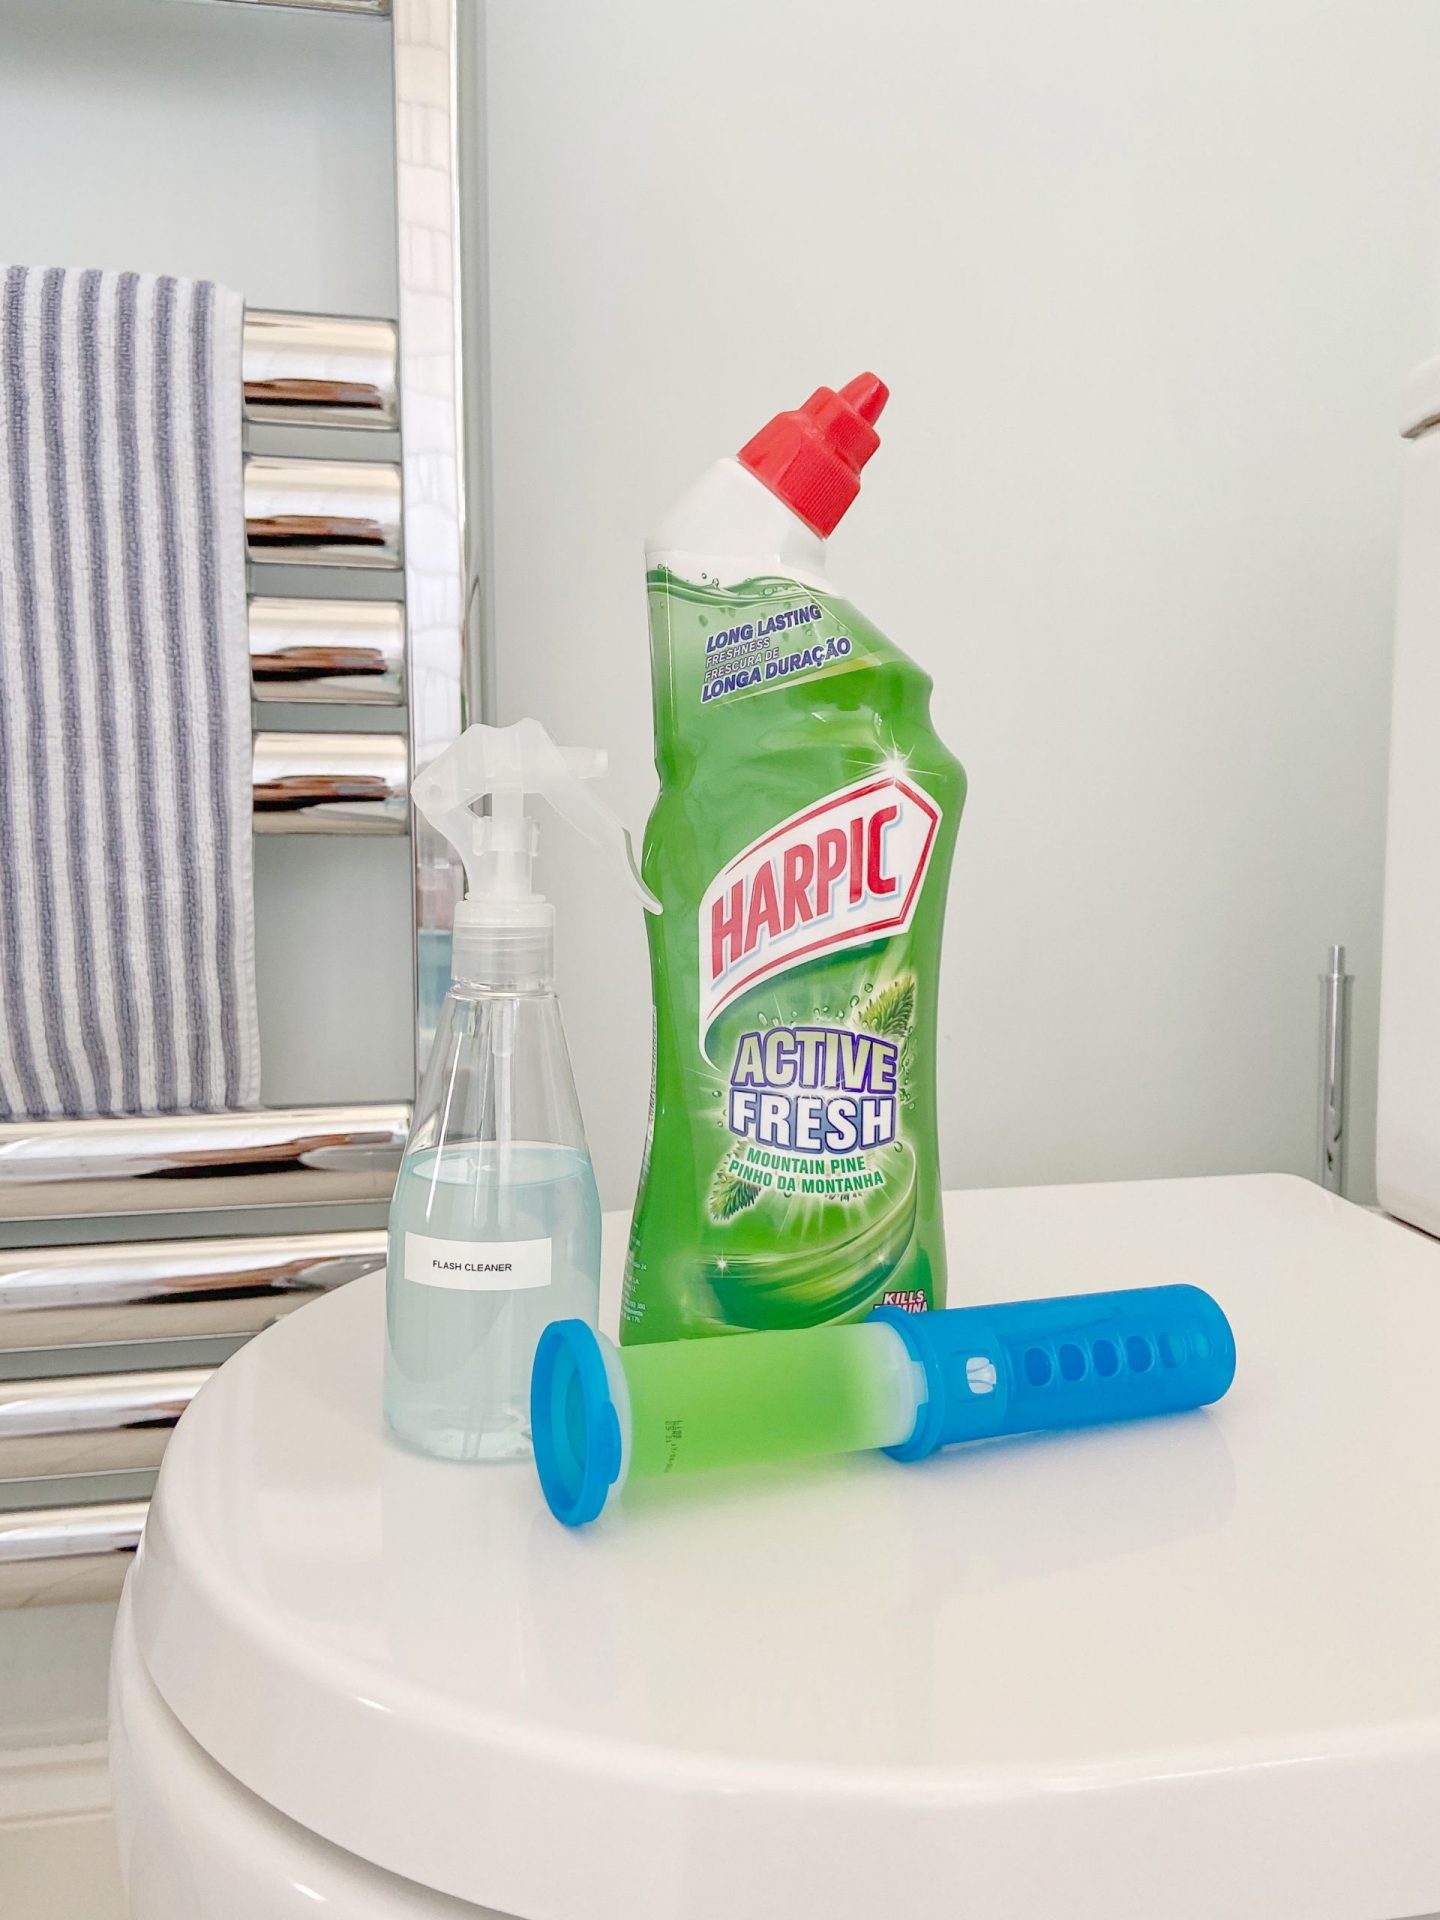 Cleaning Products for the bathroom and toilet